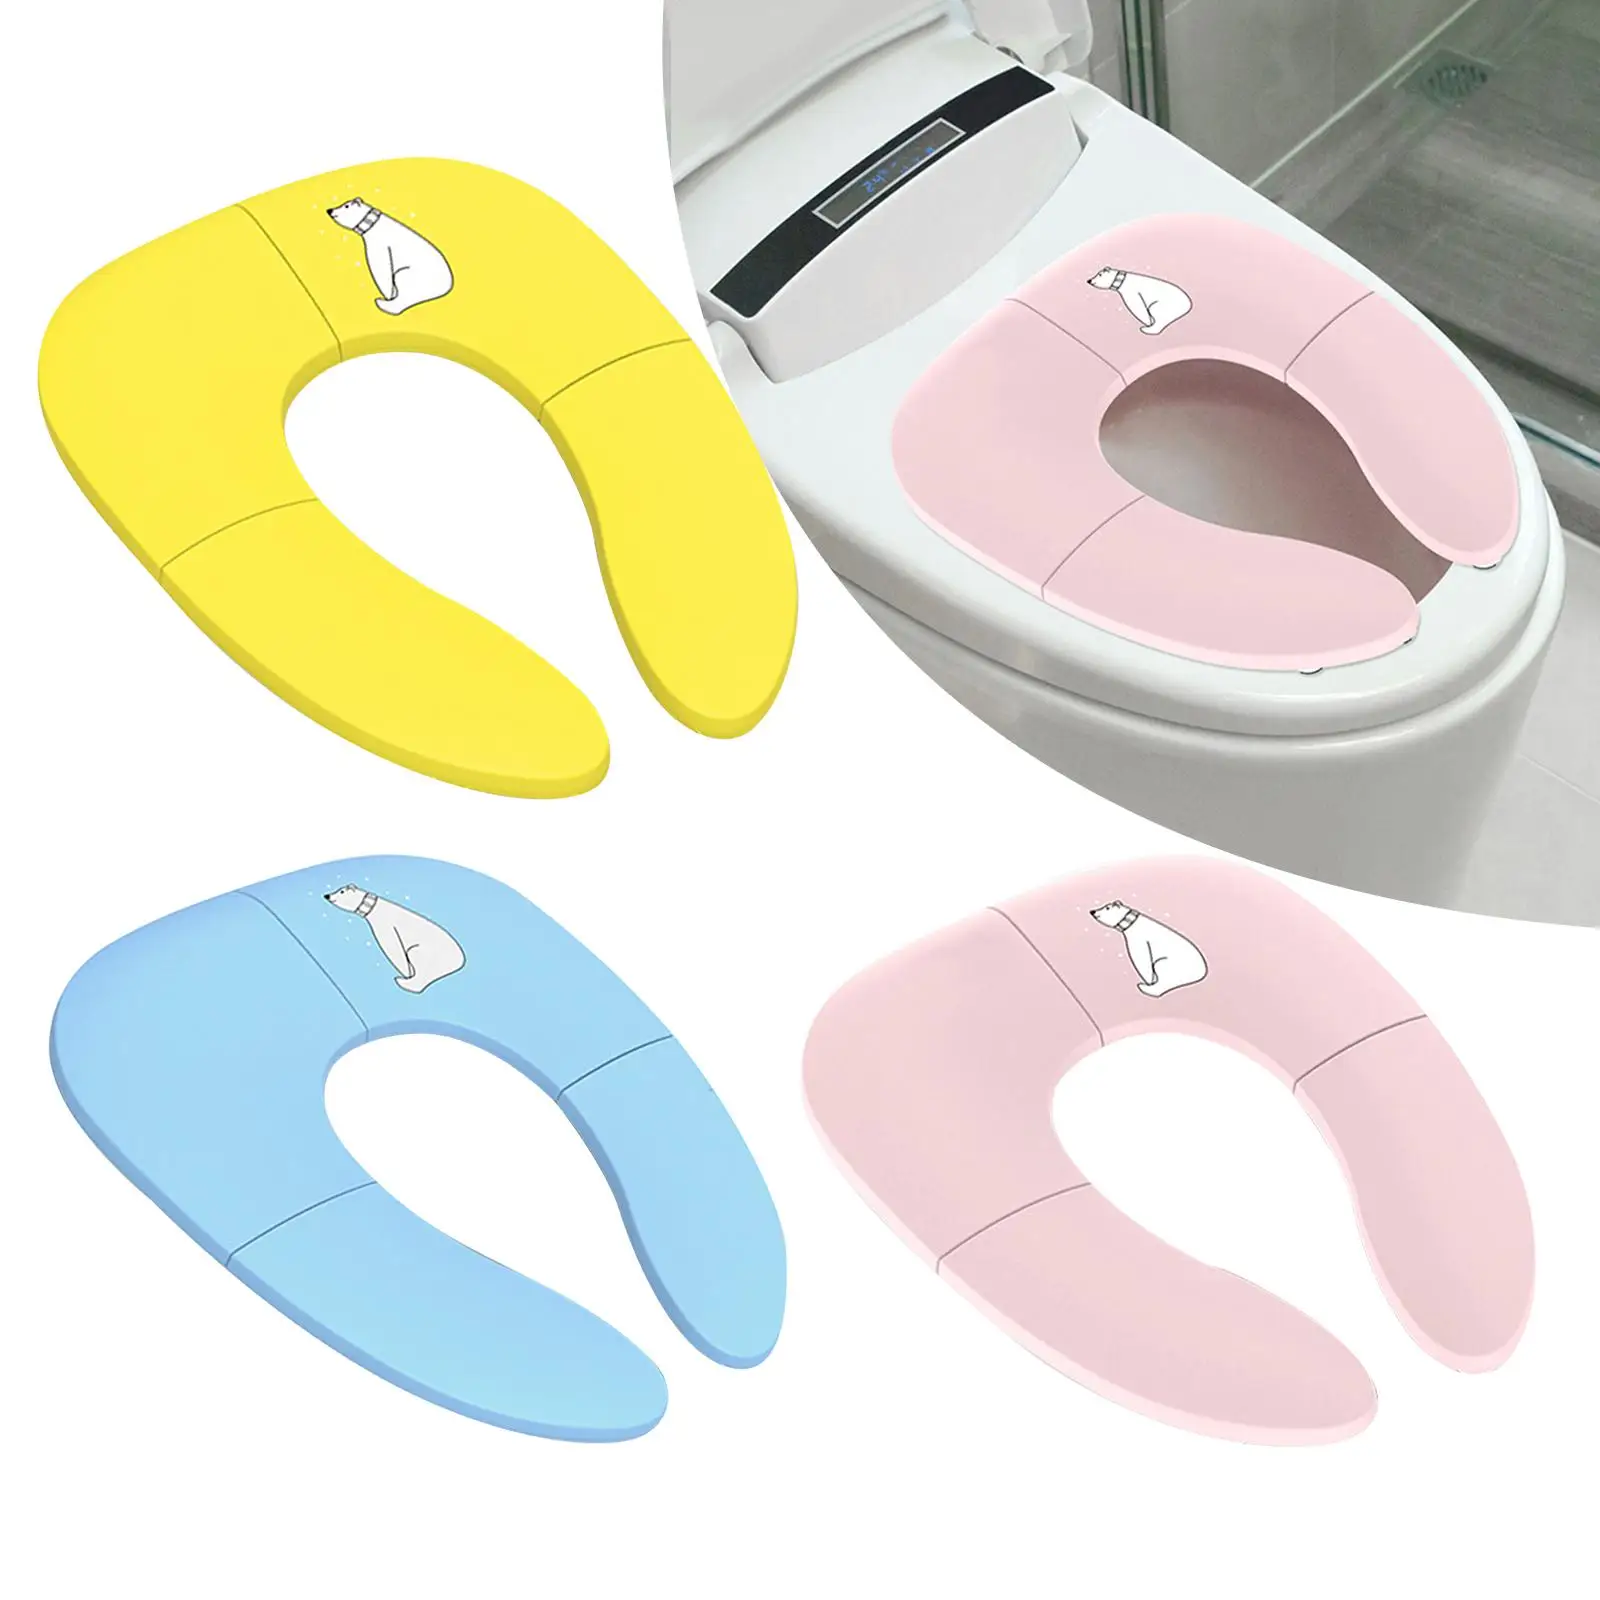 Foldable Toilet Cover training Seat Reusable Non Slip Portable Toilet Seat pad for Home Use Adults girls Kids